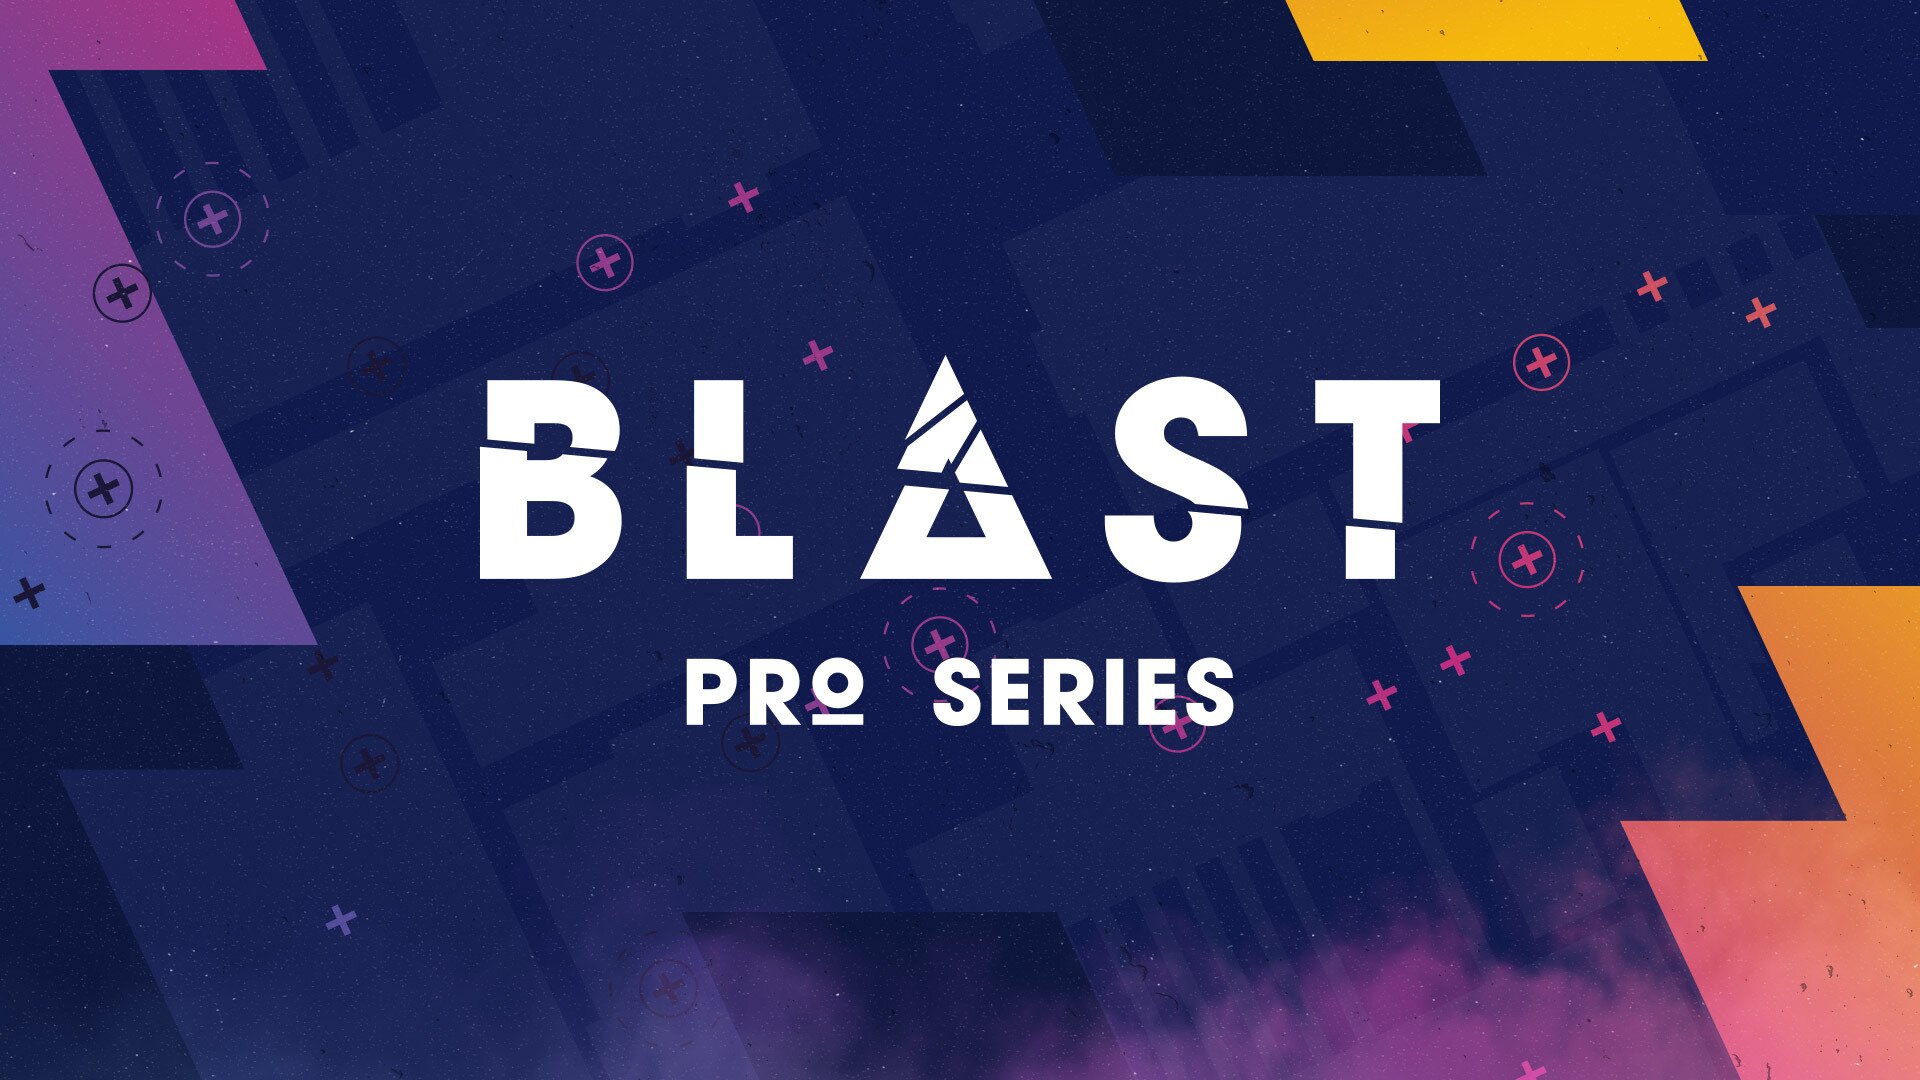 Following a star-studded series at the ESL Pro League Season 8 Finals, CS:GO fans are already gearing up for their next big event - Blast Pro Series Lisbon.